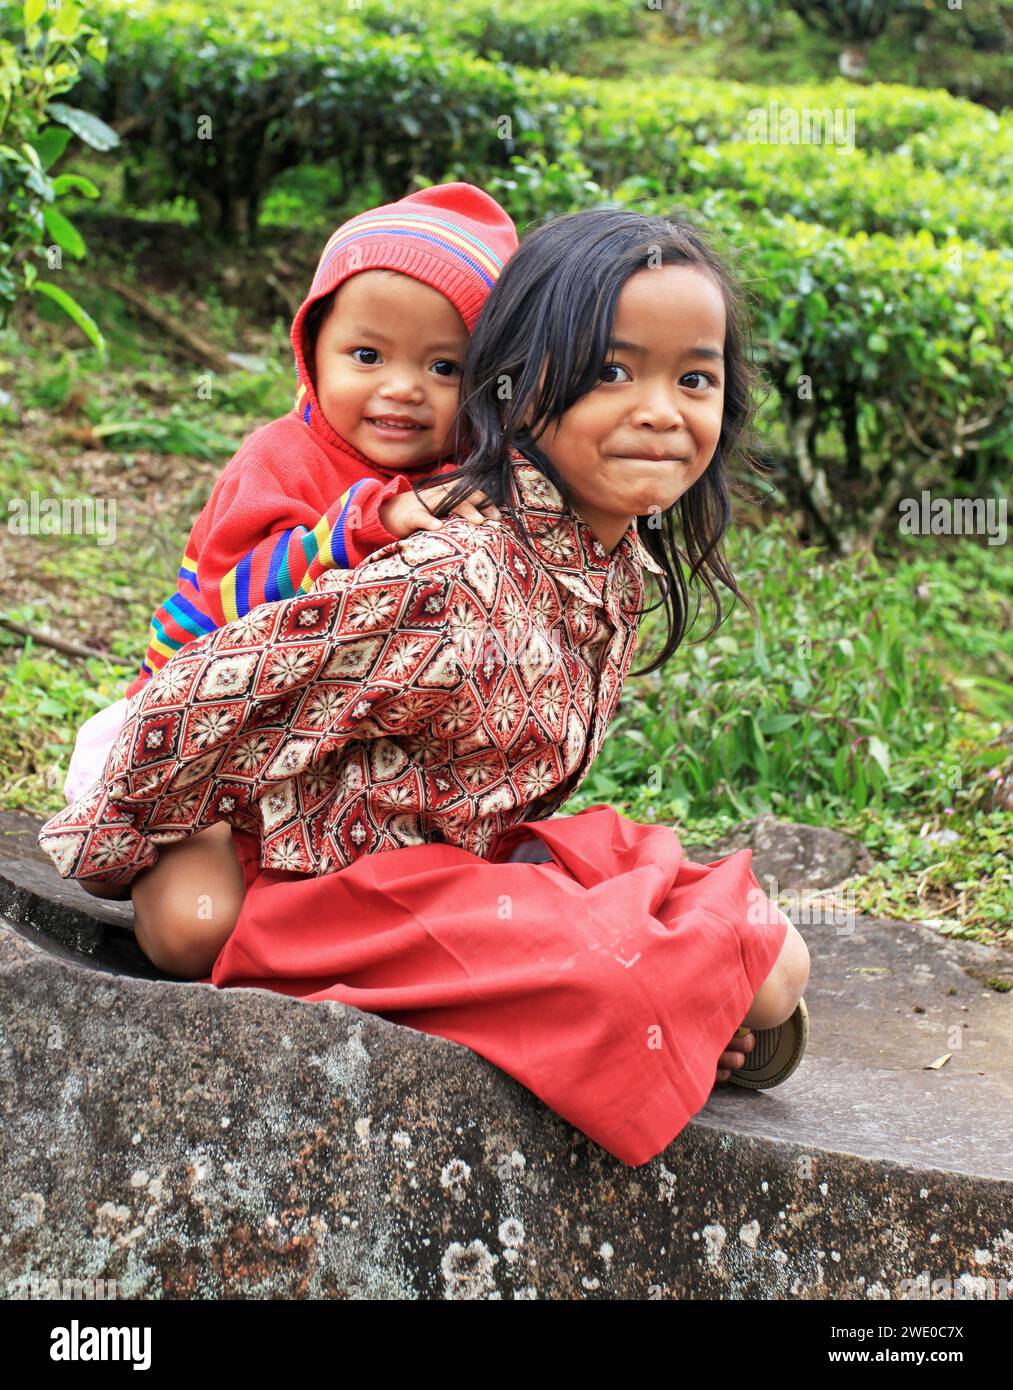 Young girl and baby in Ciwidey, West Java, Indonesia. Stock Photo